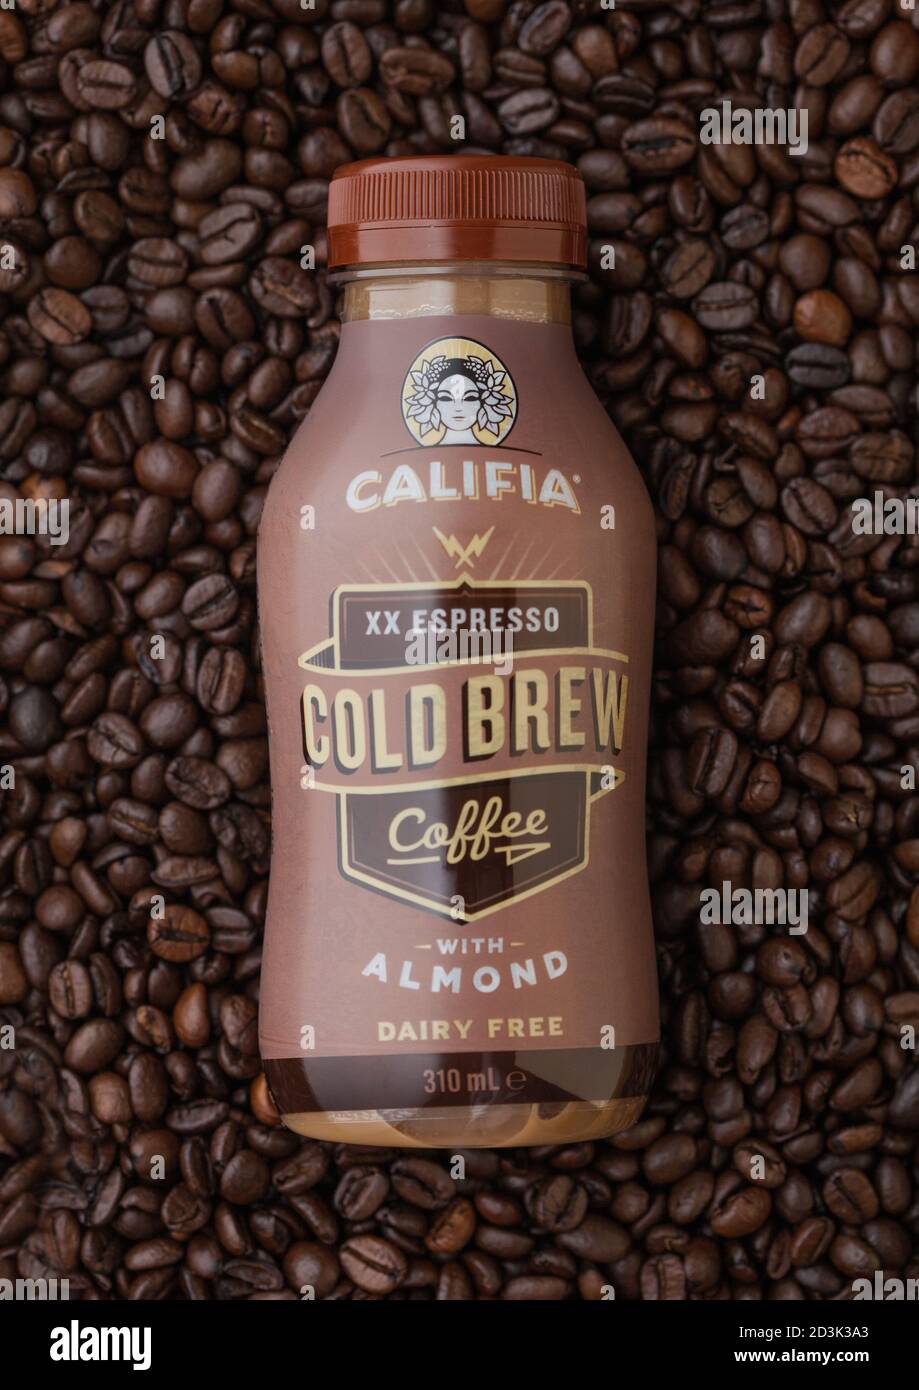 LONDON, UK - SEPTEMBER 09, 2020: Bottle of cold Califia espresso cold brew coffee with almonds on top of raw coffee beans. Stock Photo